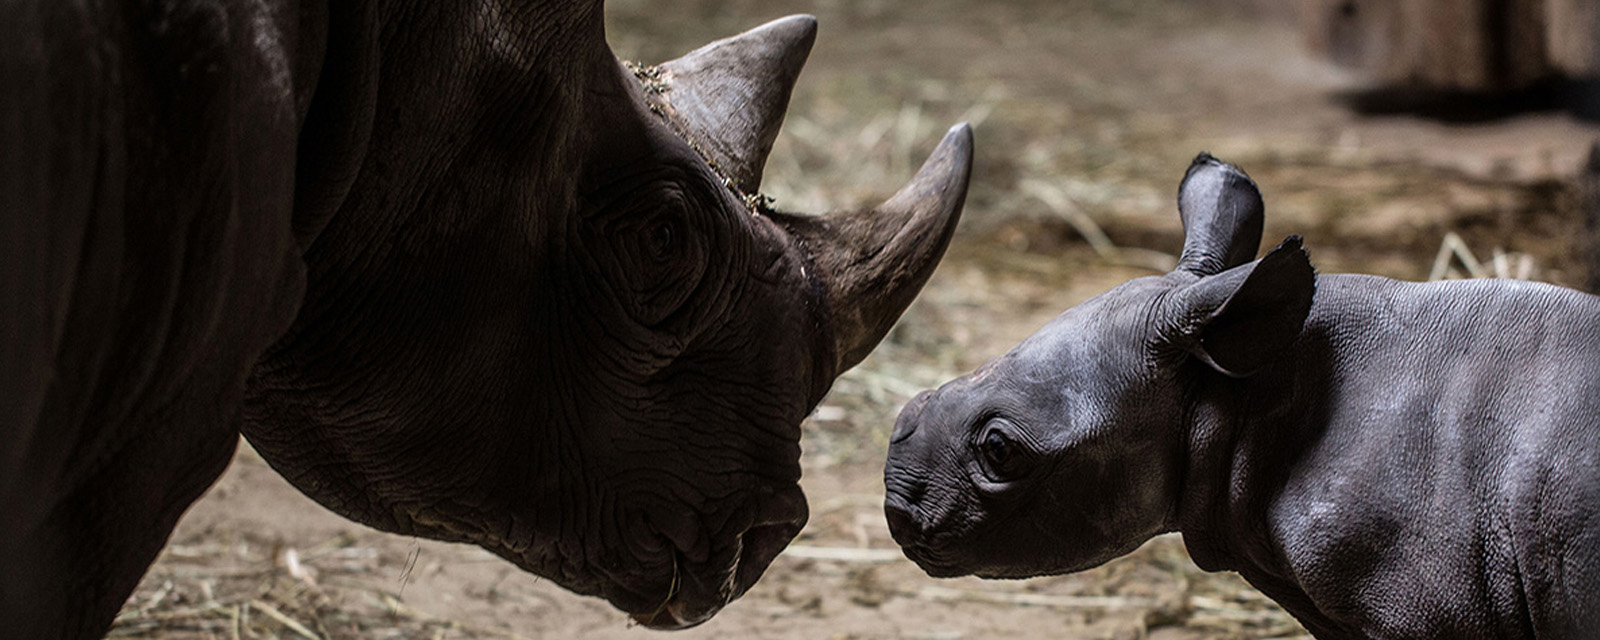 Critically Endangered Eastern Black Rhino Born at Lincoln Park Zoo Is a  Male - Lincoln Park Zoo